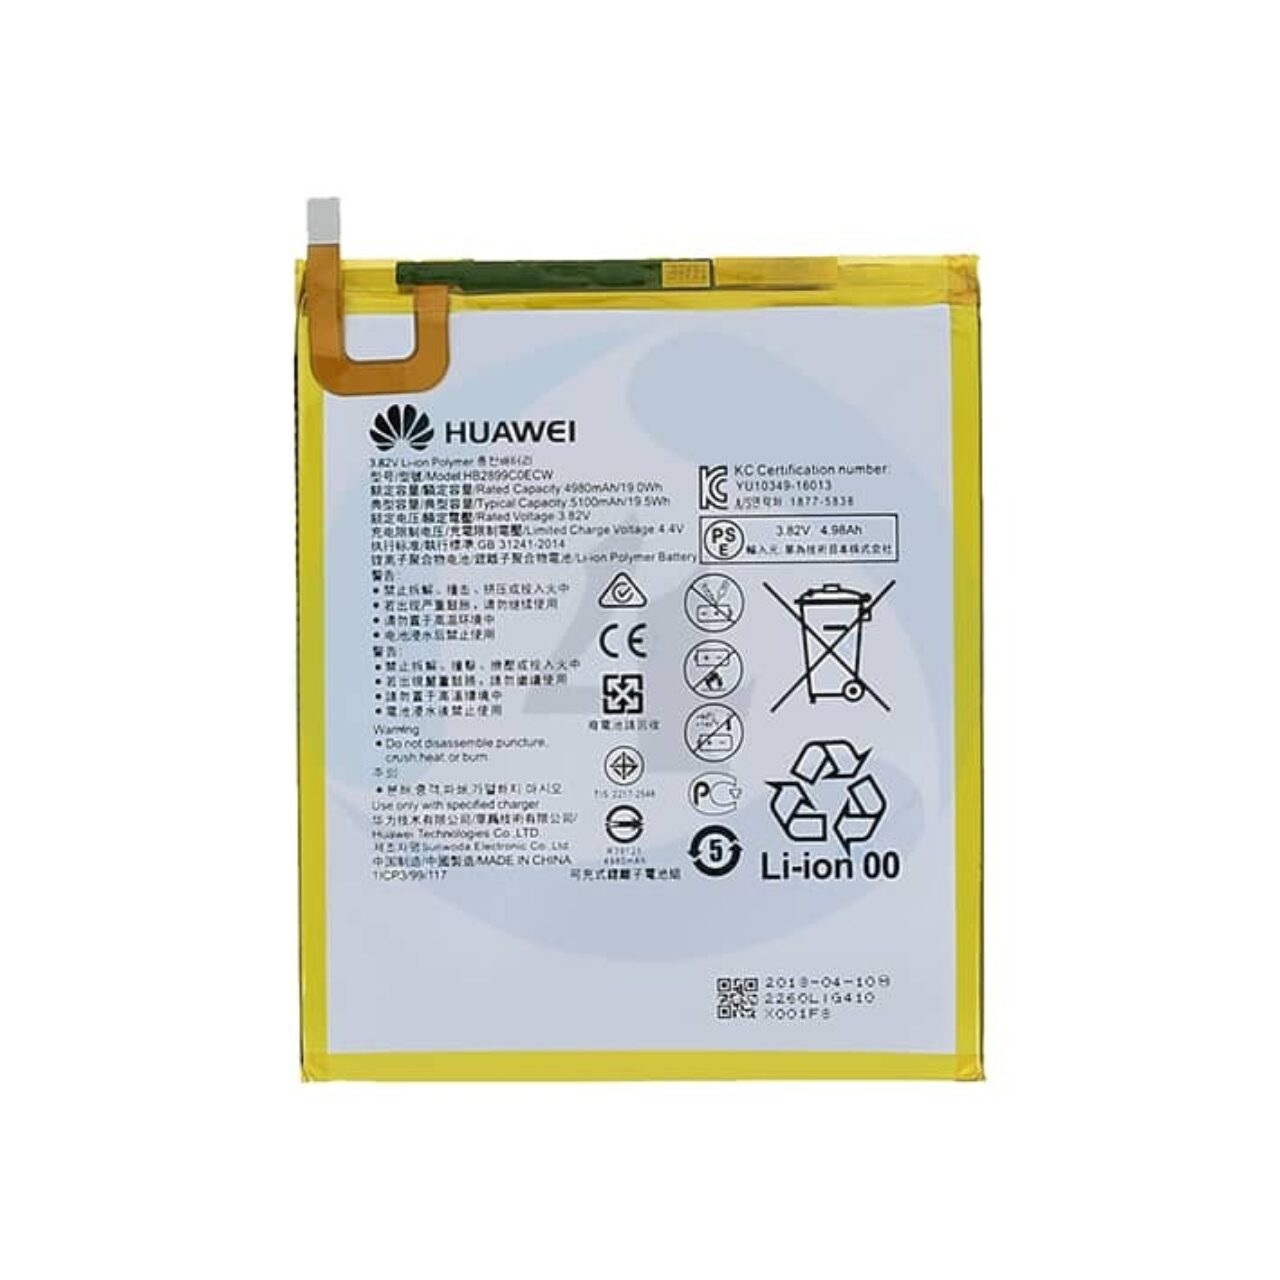 Battery For Huawei T5 A HB2899 C0 ECW